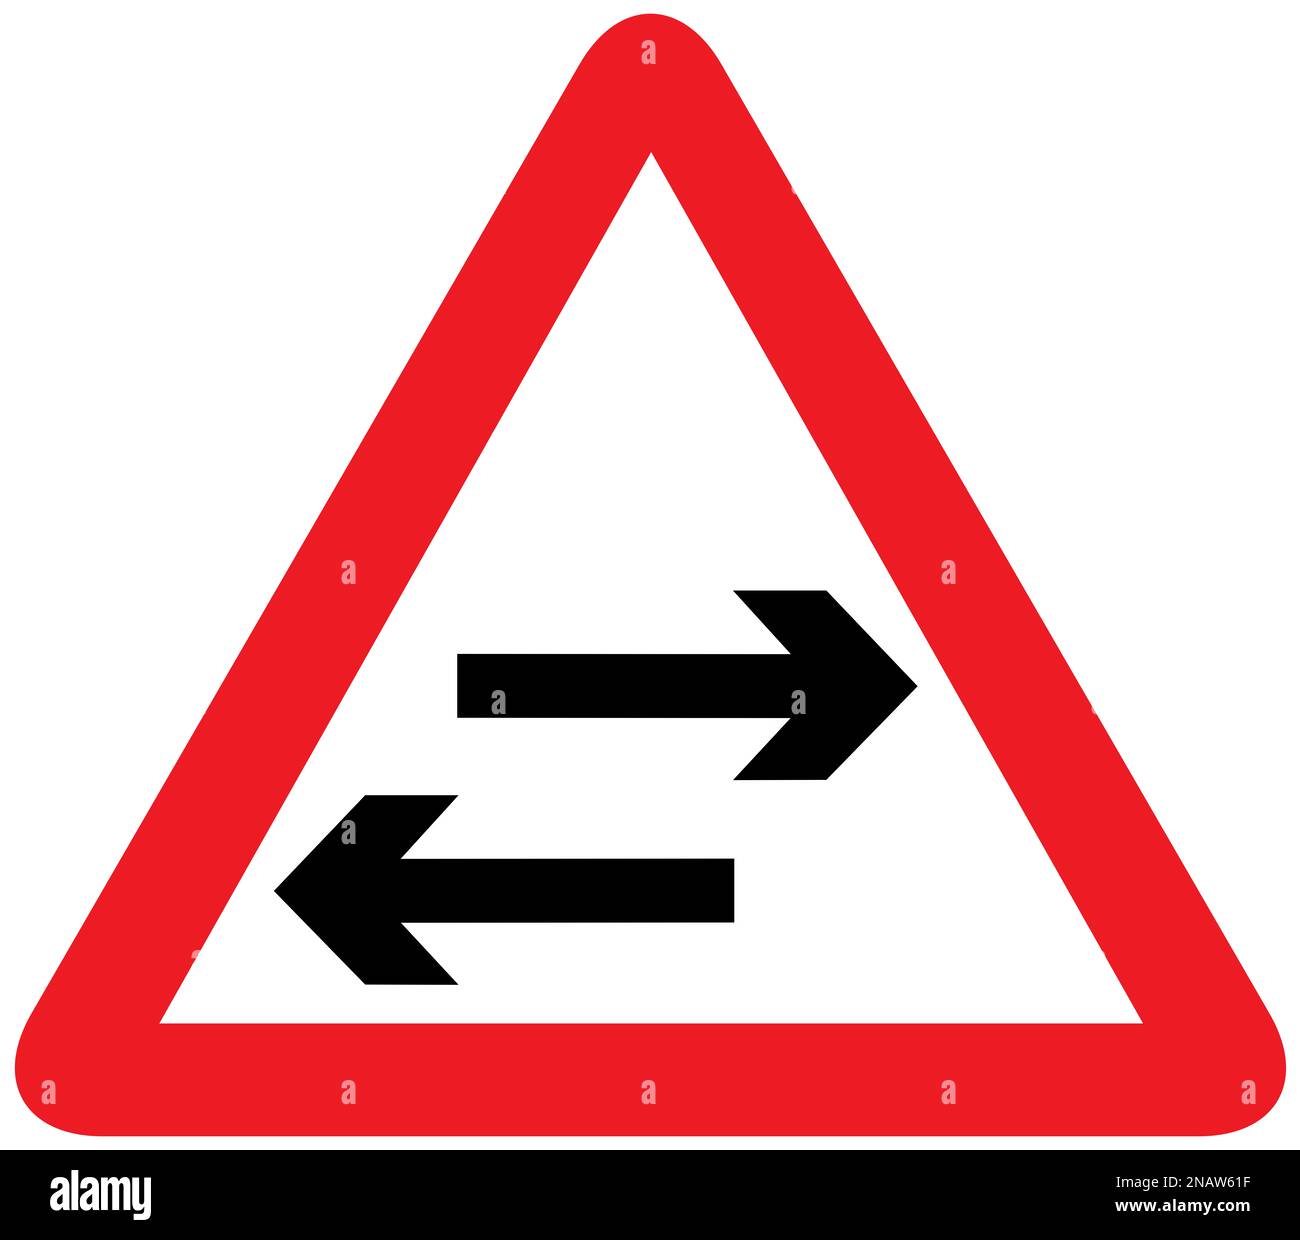 Two-way traffic on route crossing ahead British road sign Stock Photo